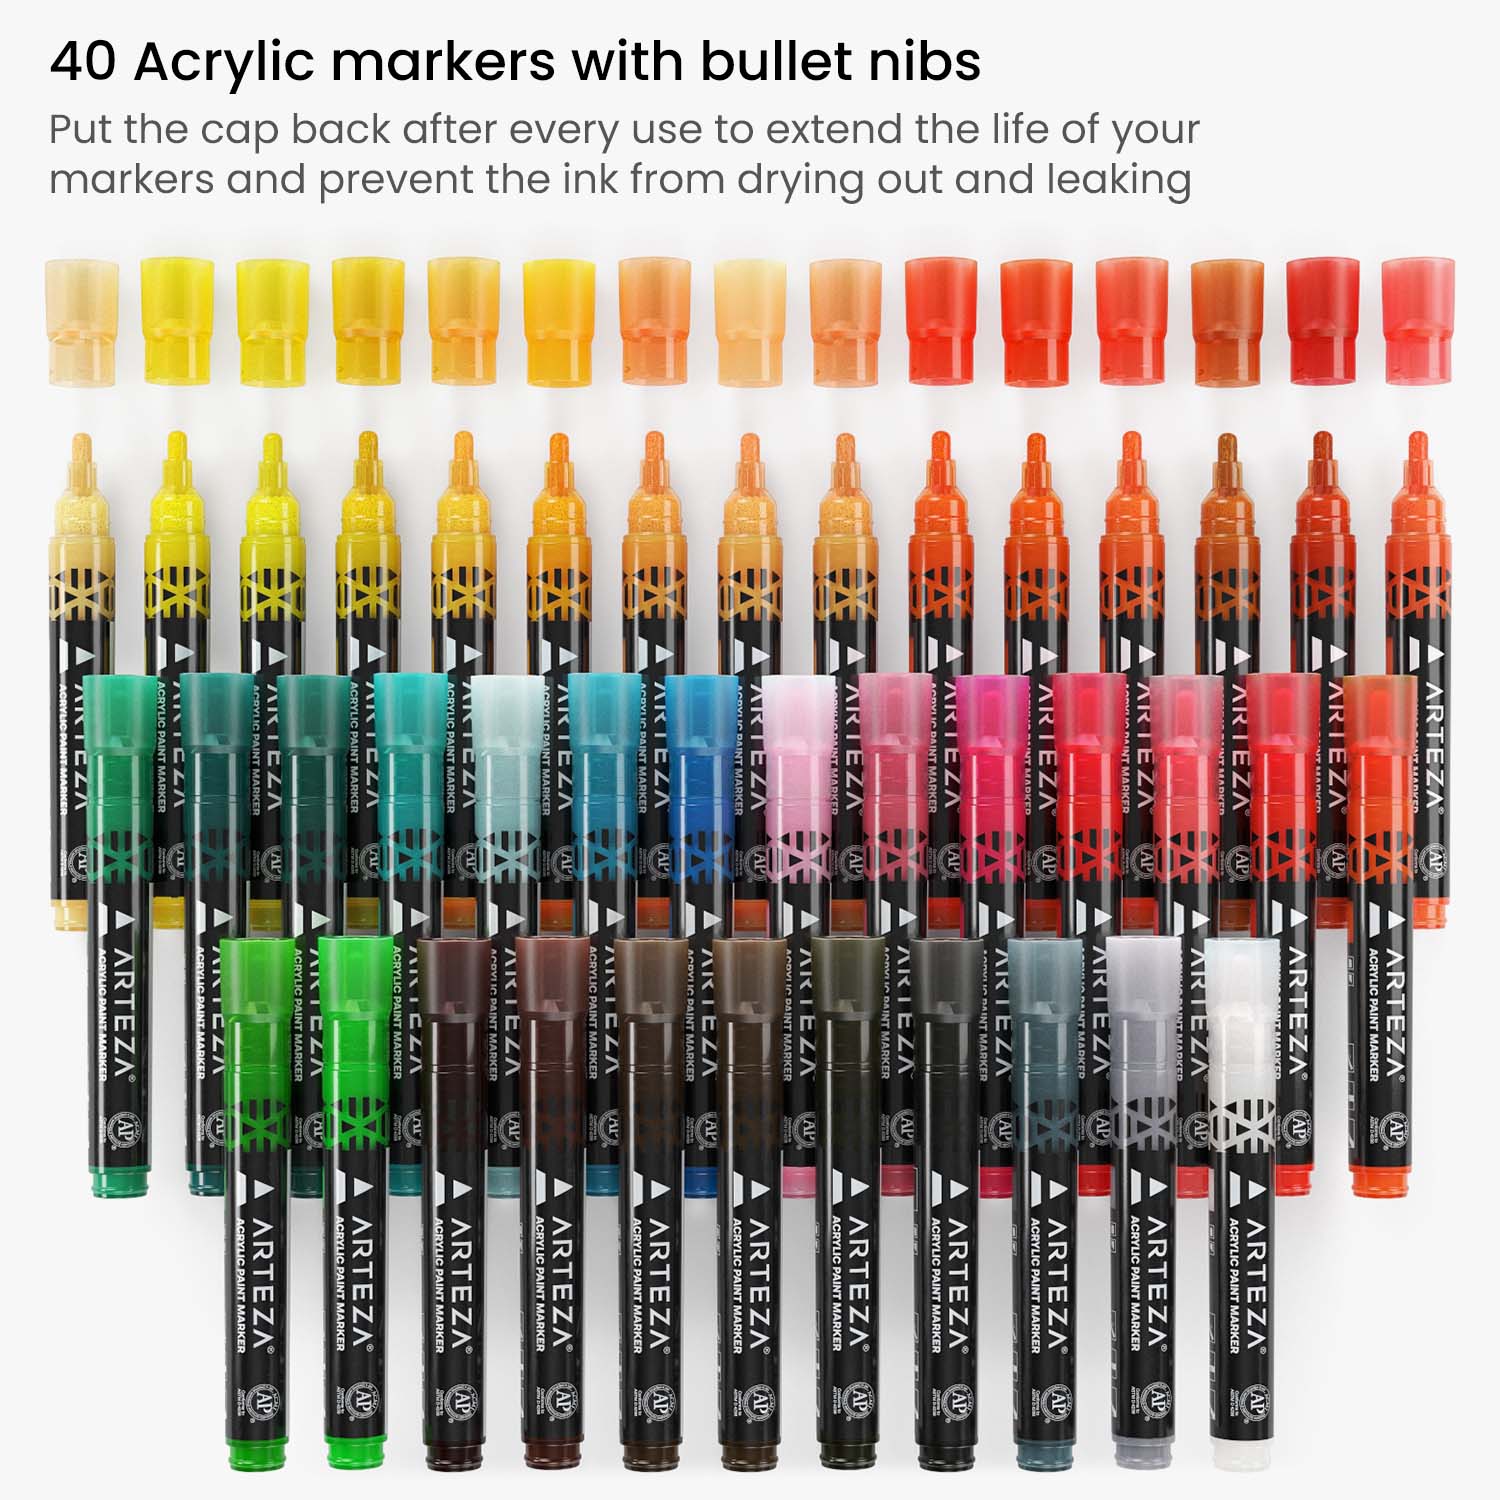 Set of 20 Acrylic Markers 🦄  As an artist, you're always looking